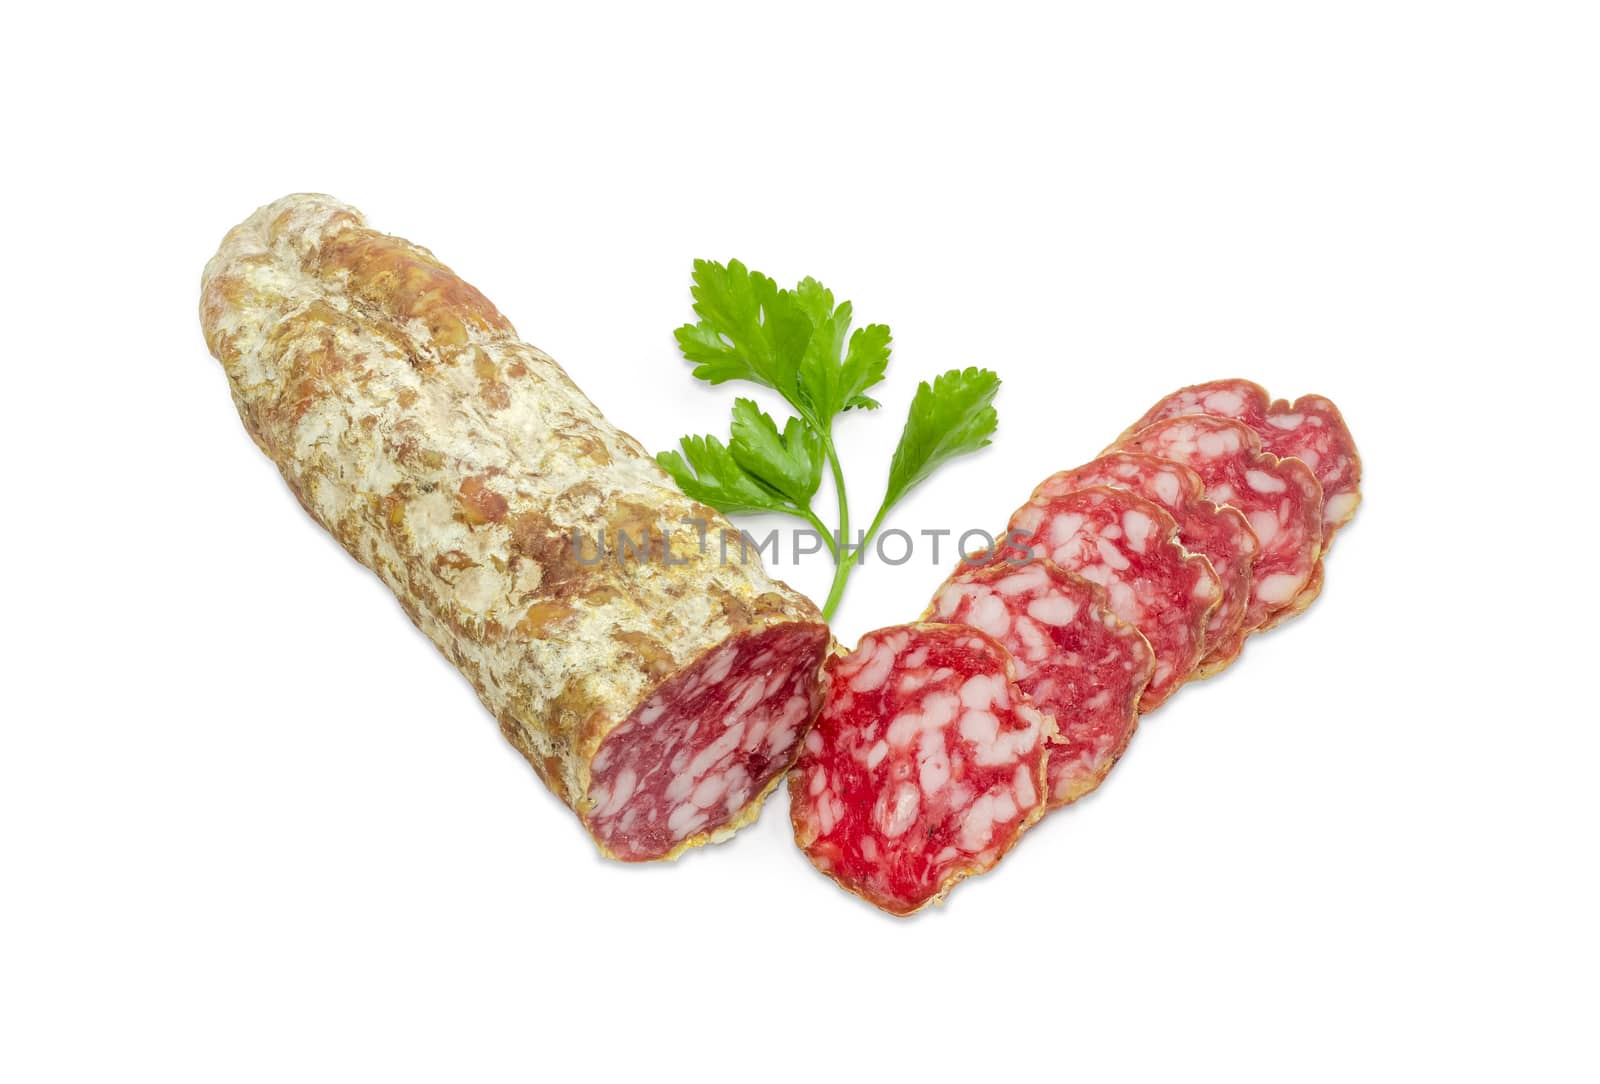 Salami and twig of parsley on a light background by anmbph